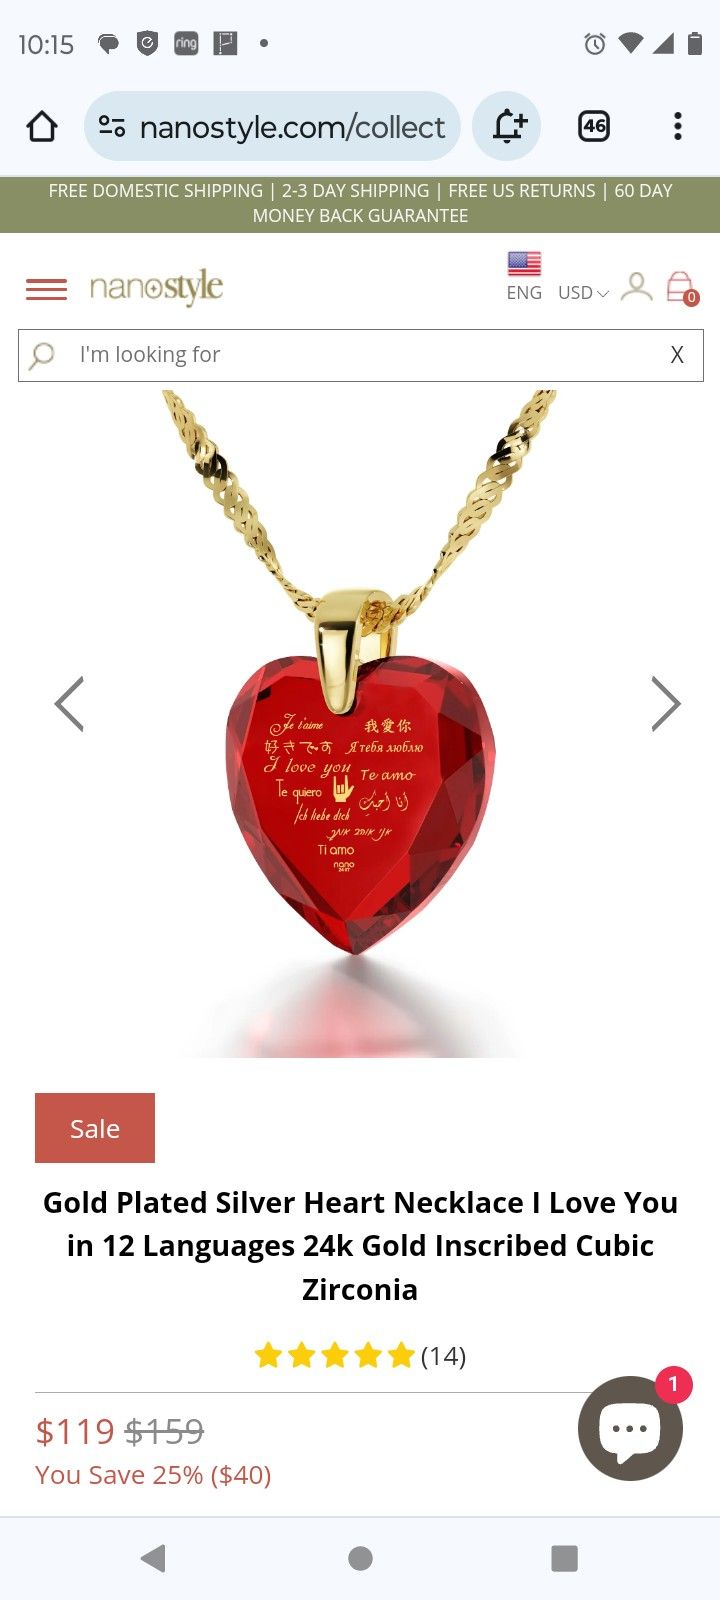 Gold Plated Silver Heart Necklace I Love You in 12 Languages 24k Gold Inscribed Cubic Zirconia

